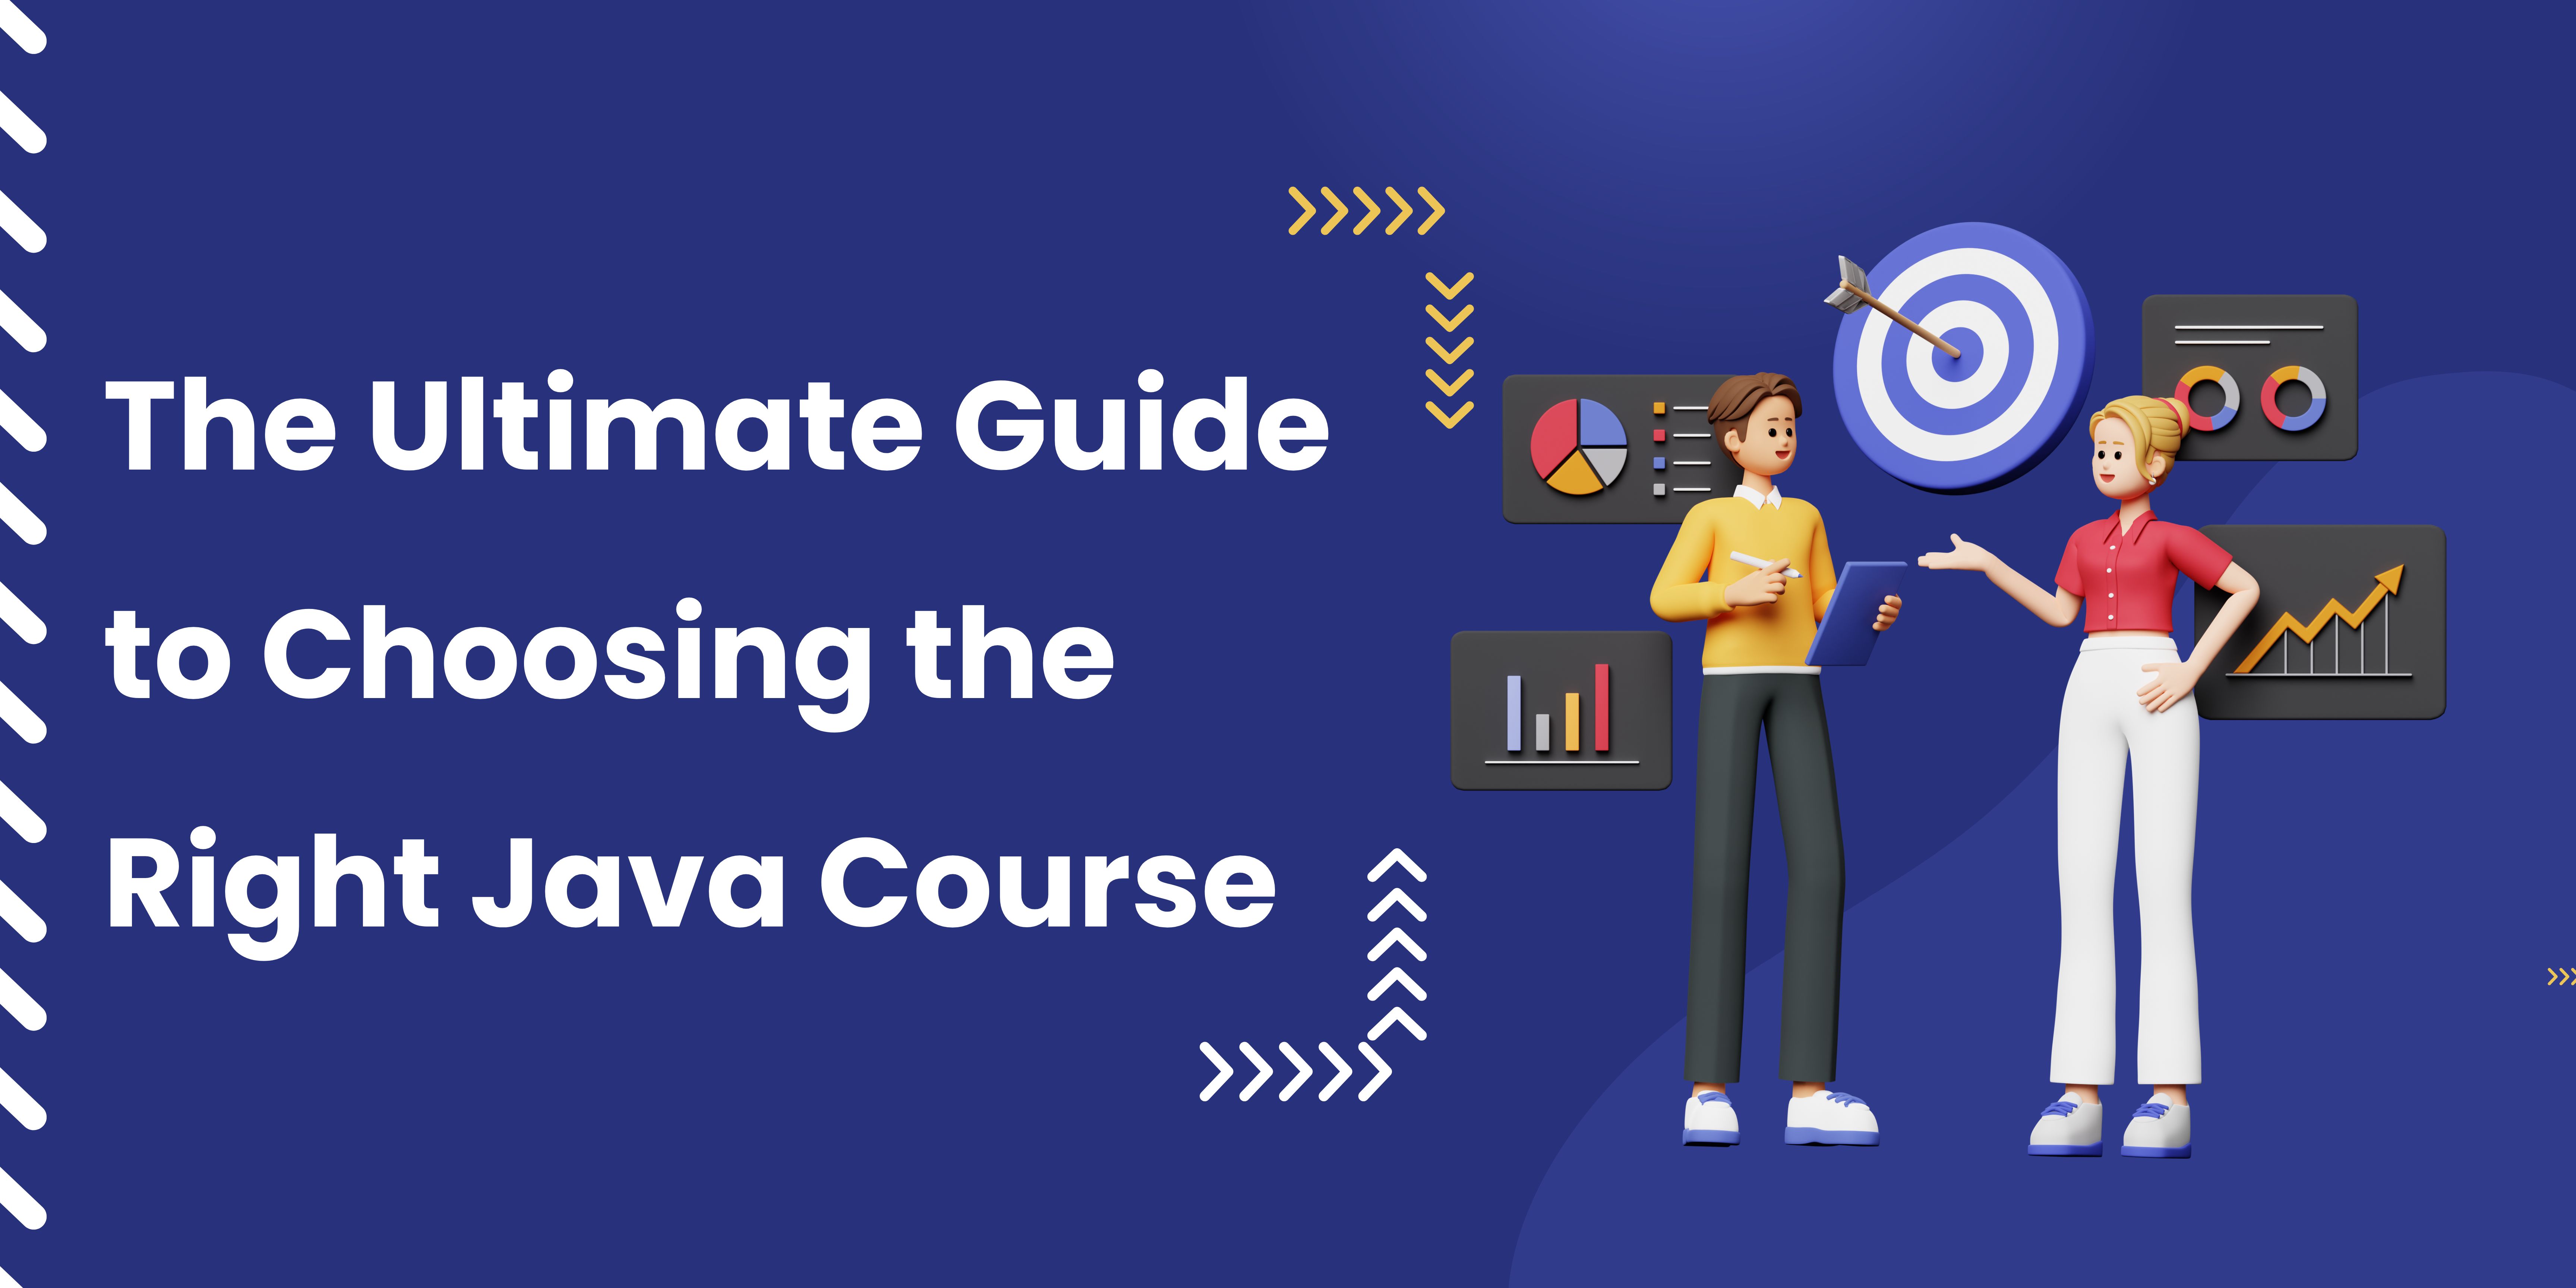 The Ultimate Guide to Choosing the Right Java Course